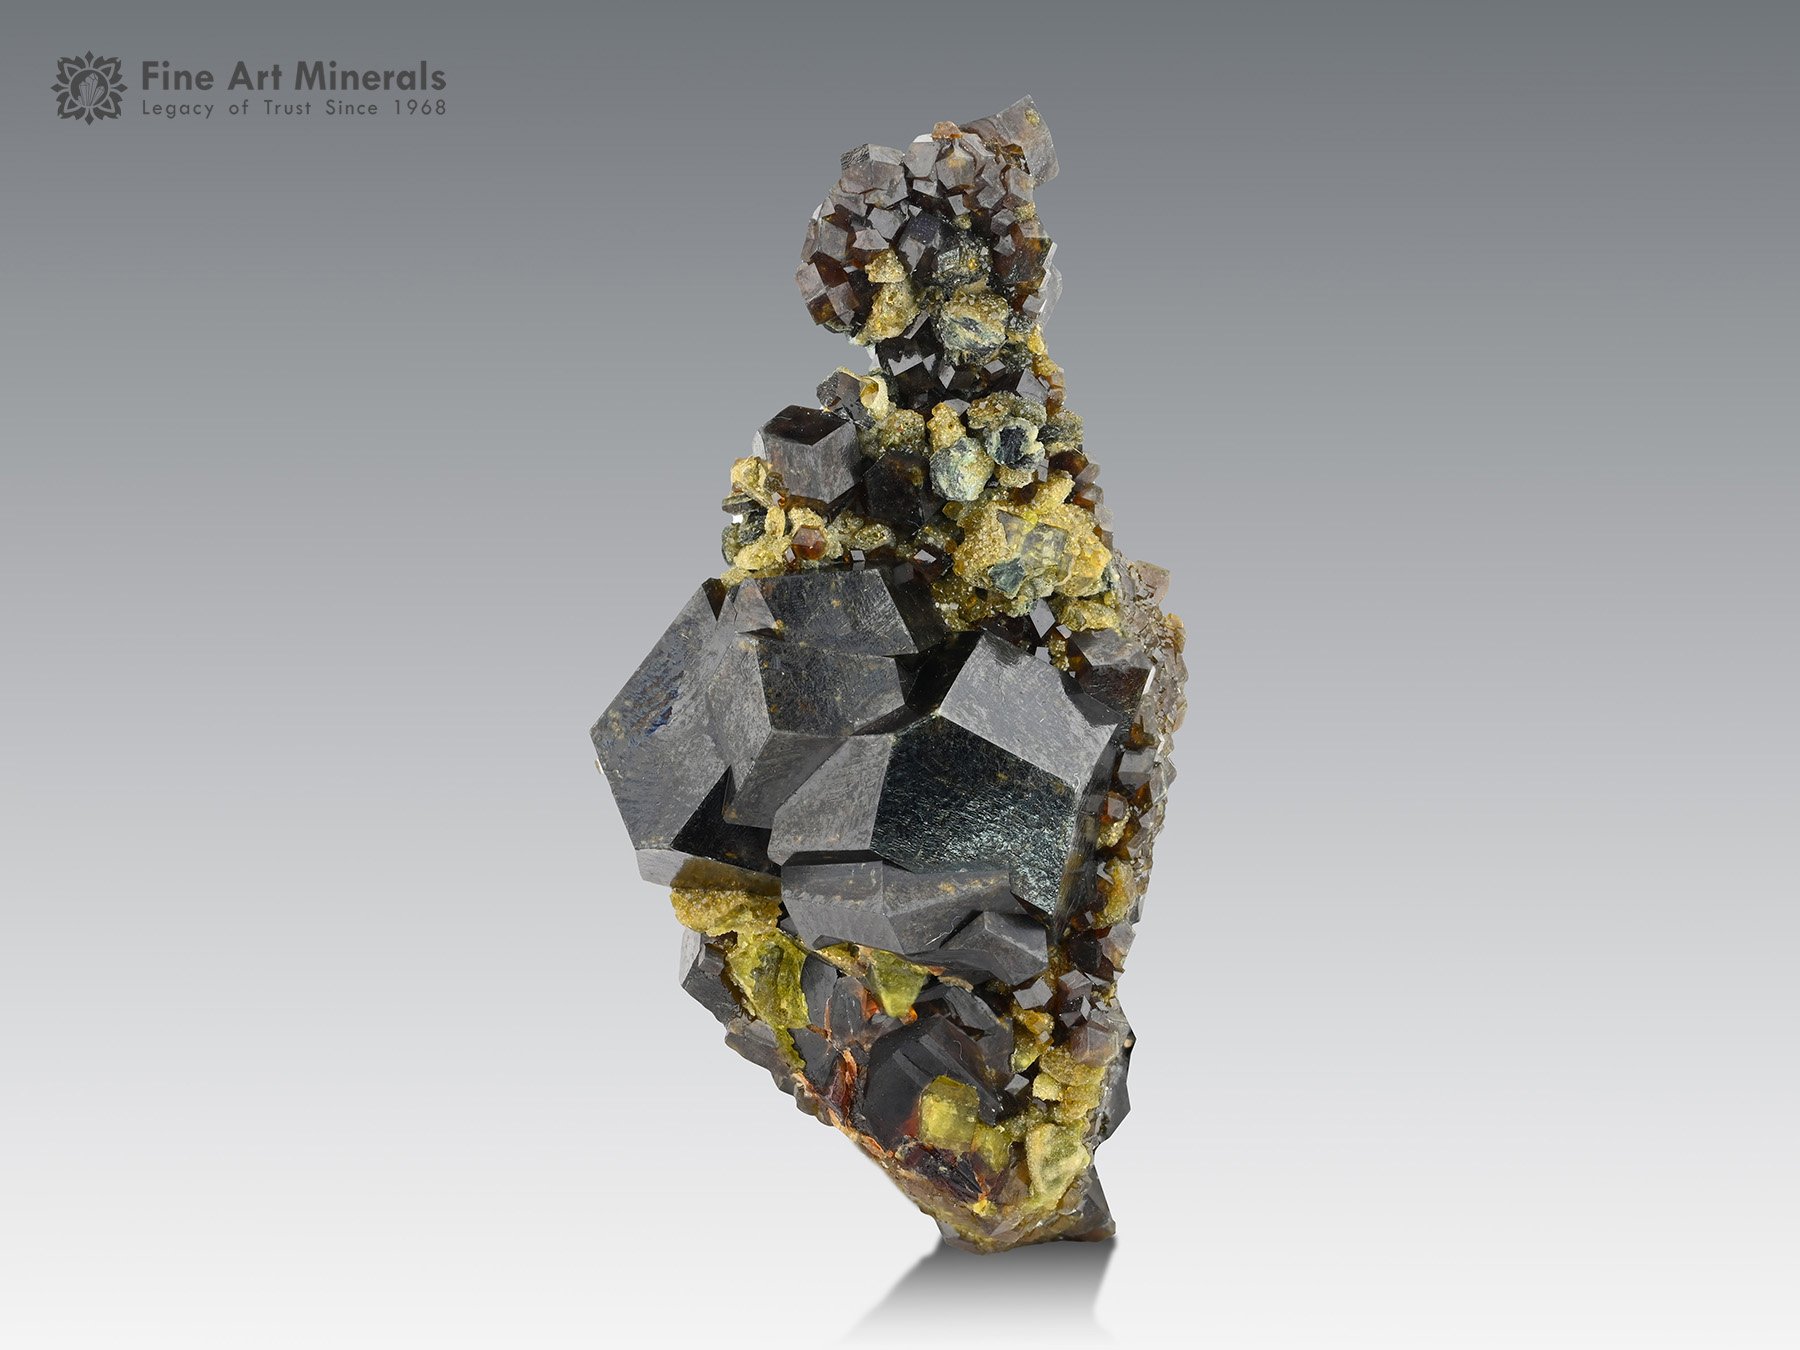 Andradite Garnet on Calcite with Epidote from Pakistan